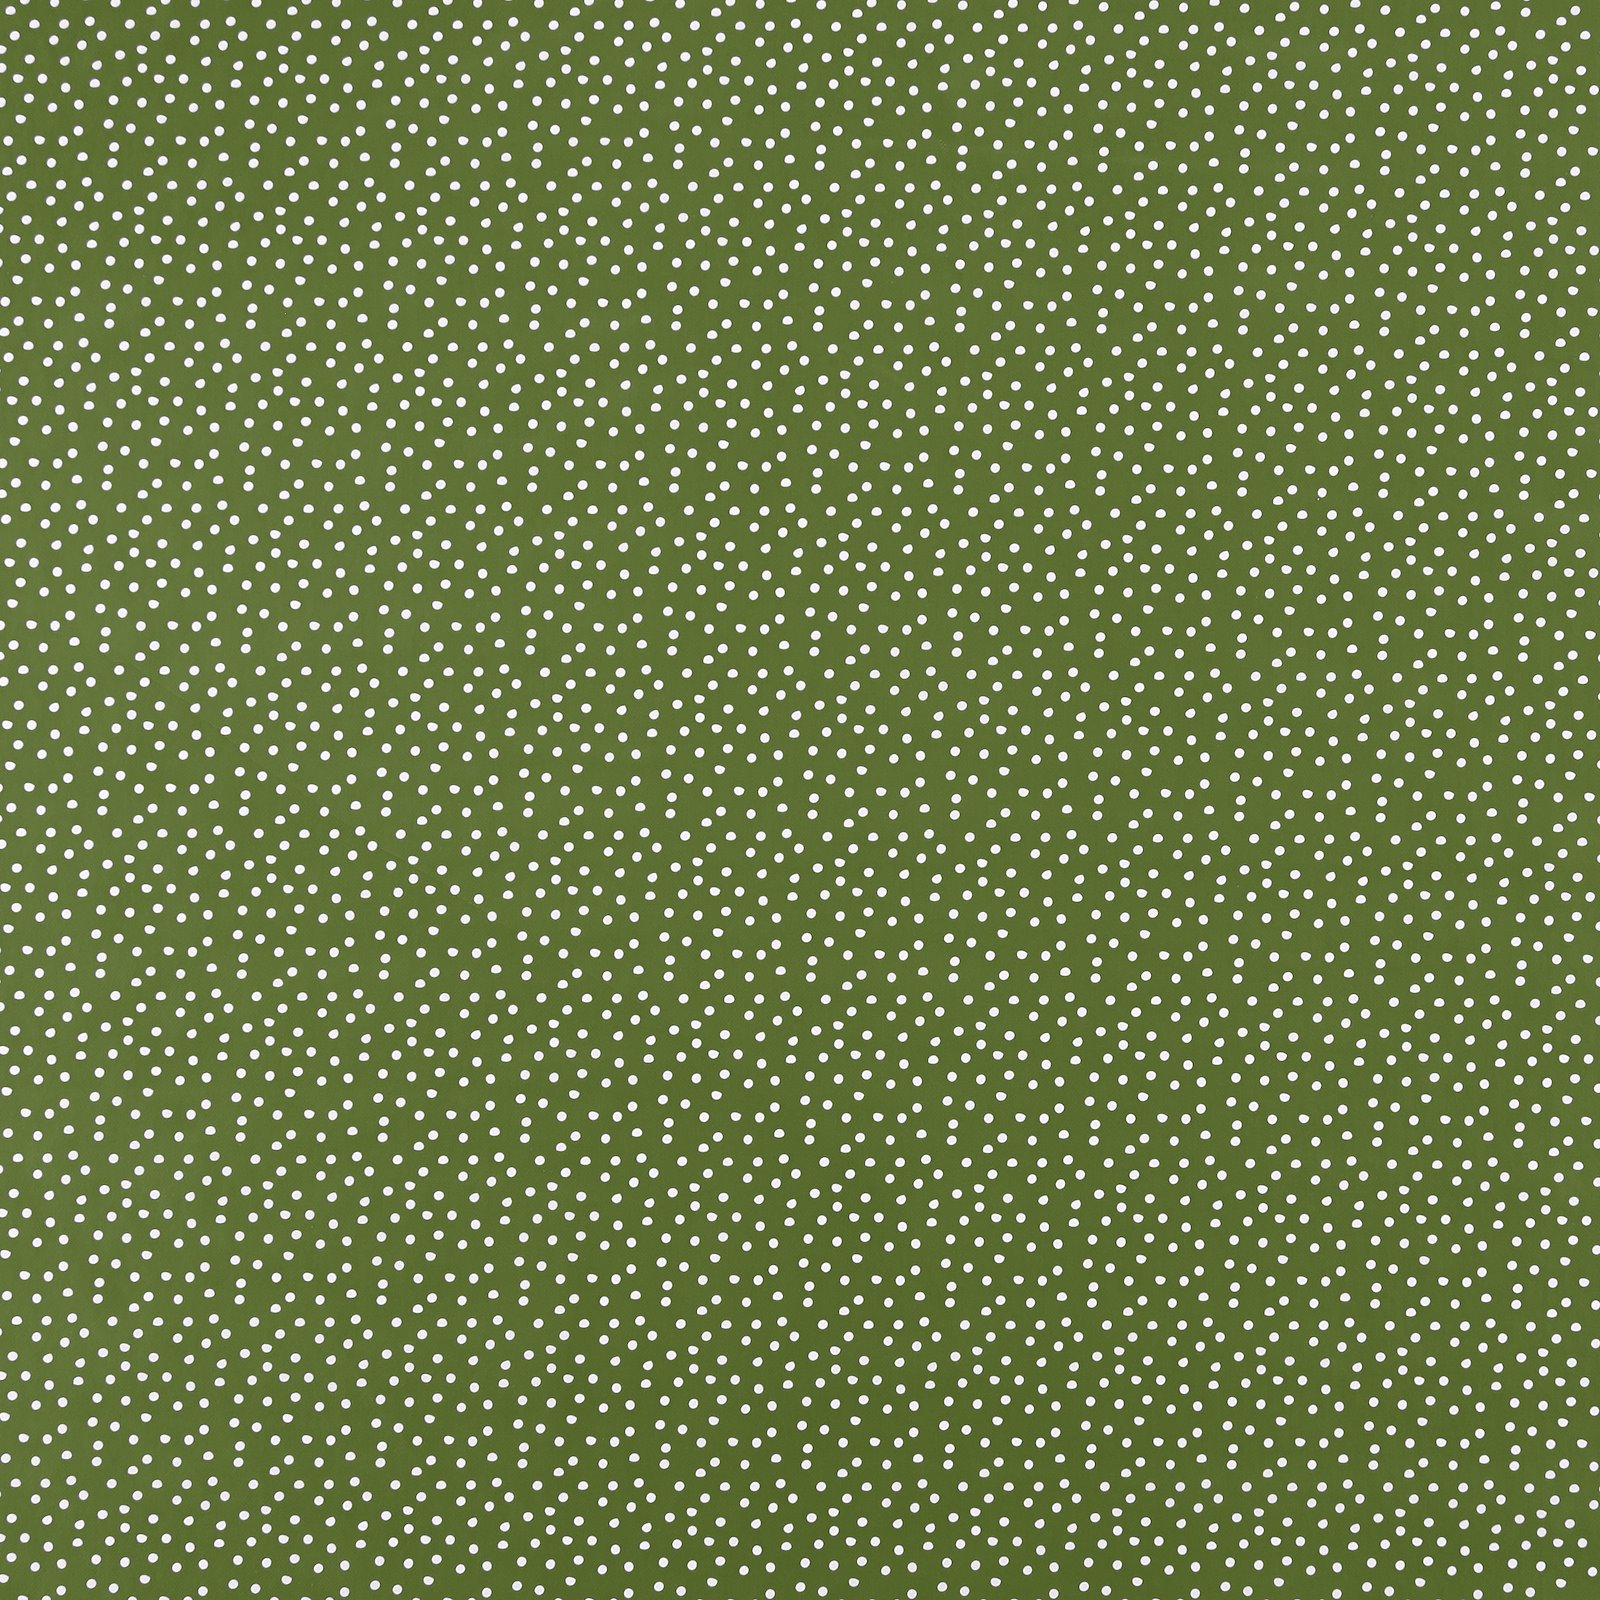 Non-woven oilcloth dark lime w dots 861732_pack_sp